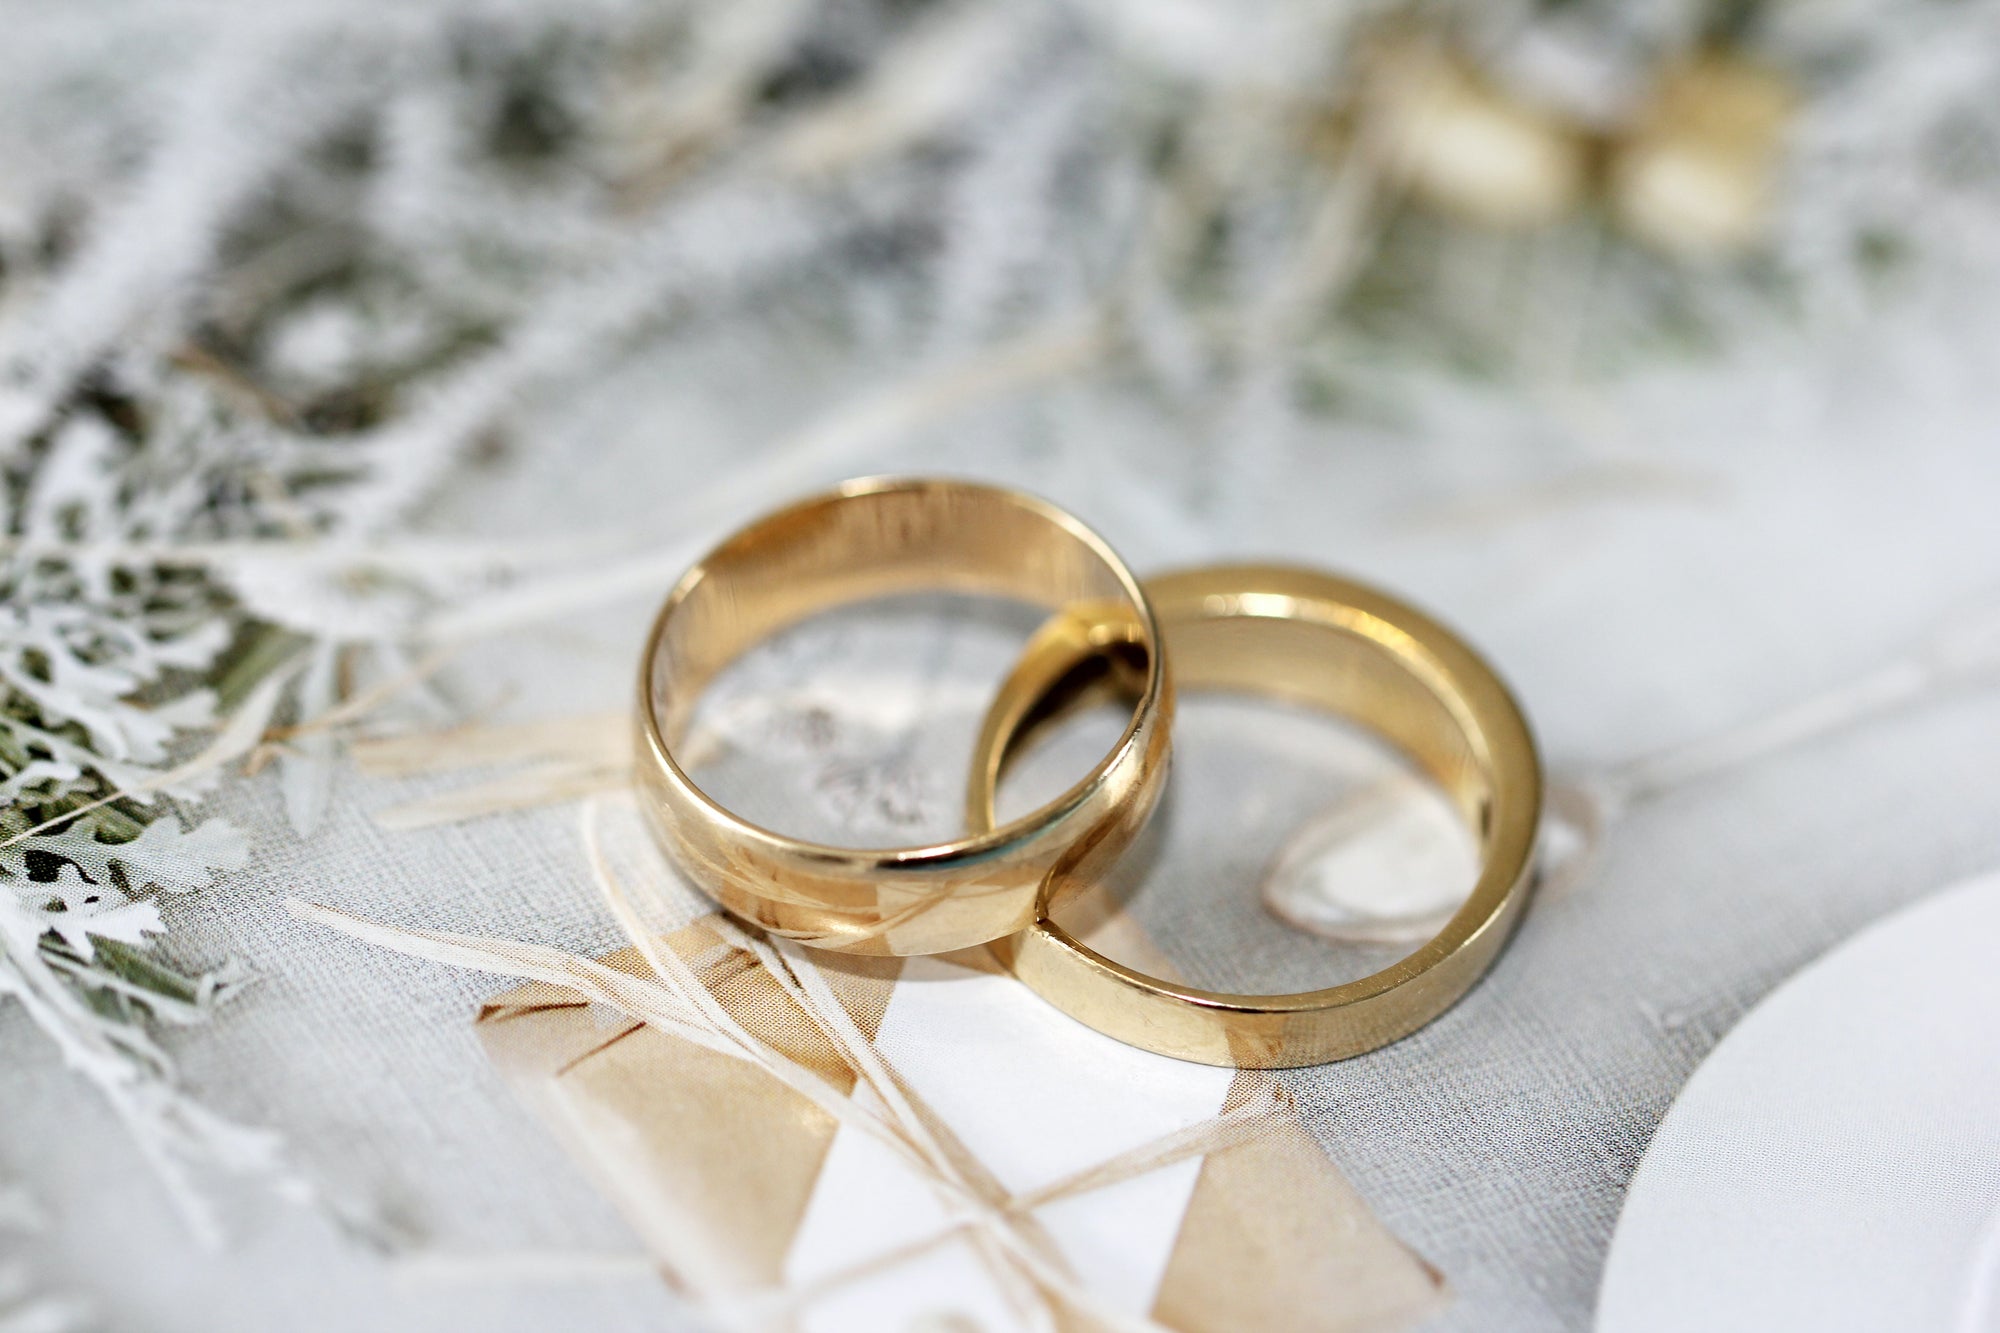 10 Questions to Ask Before Getting Married